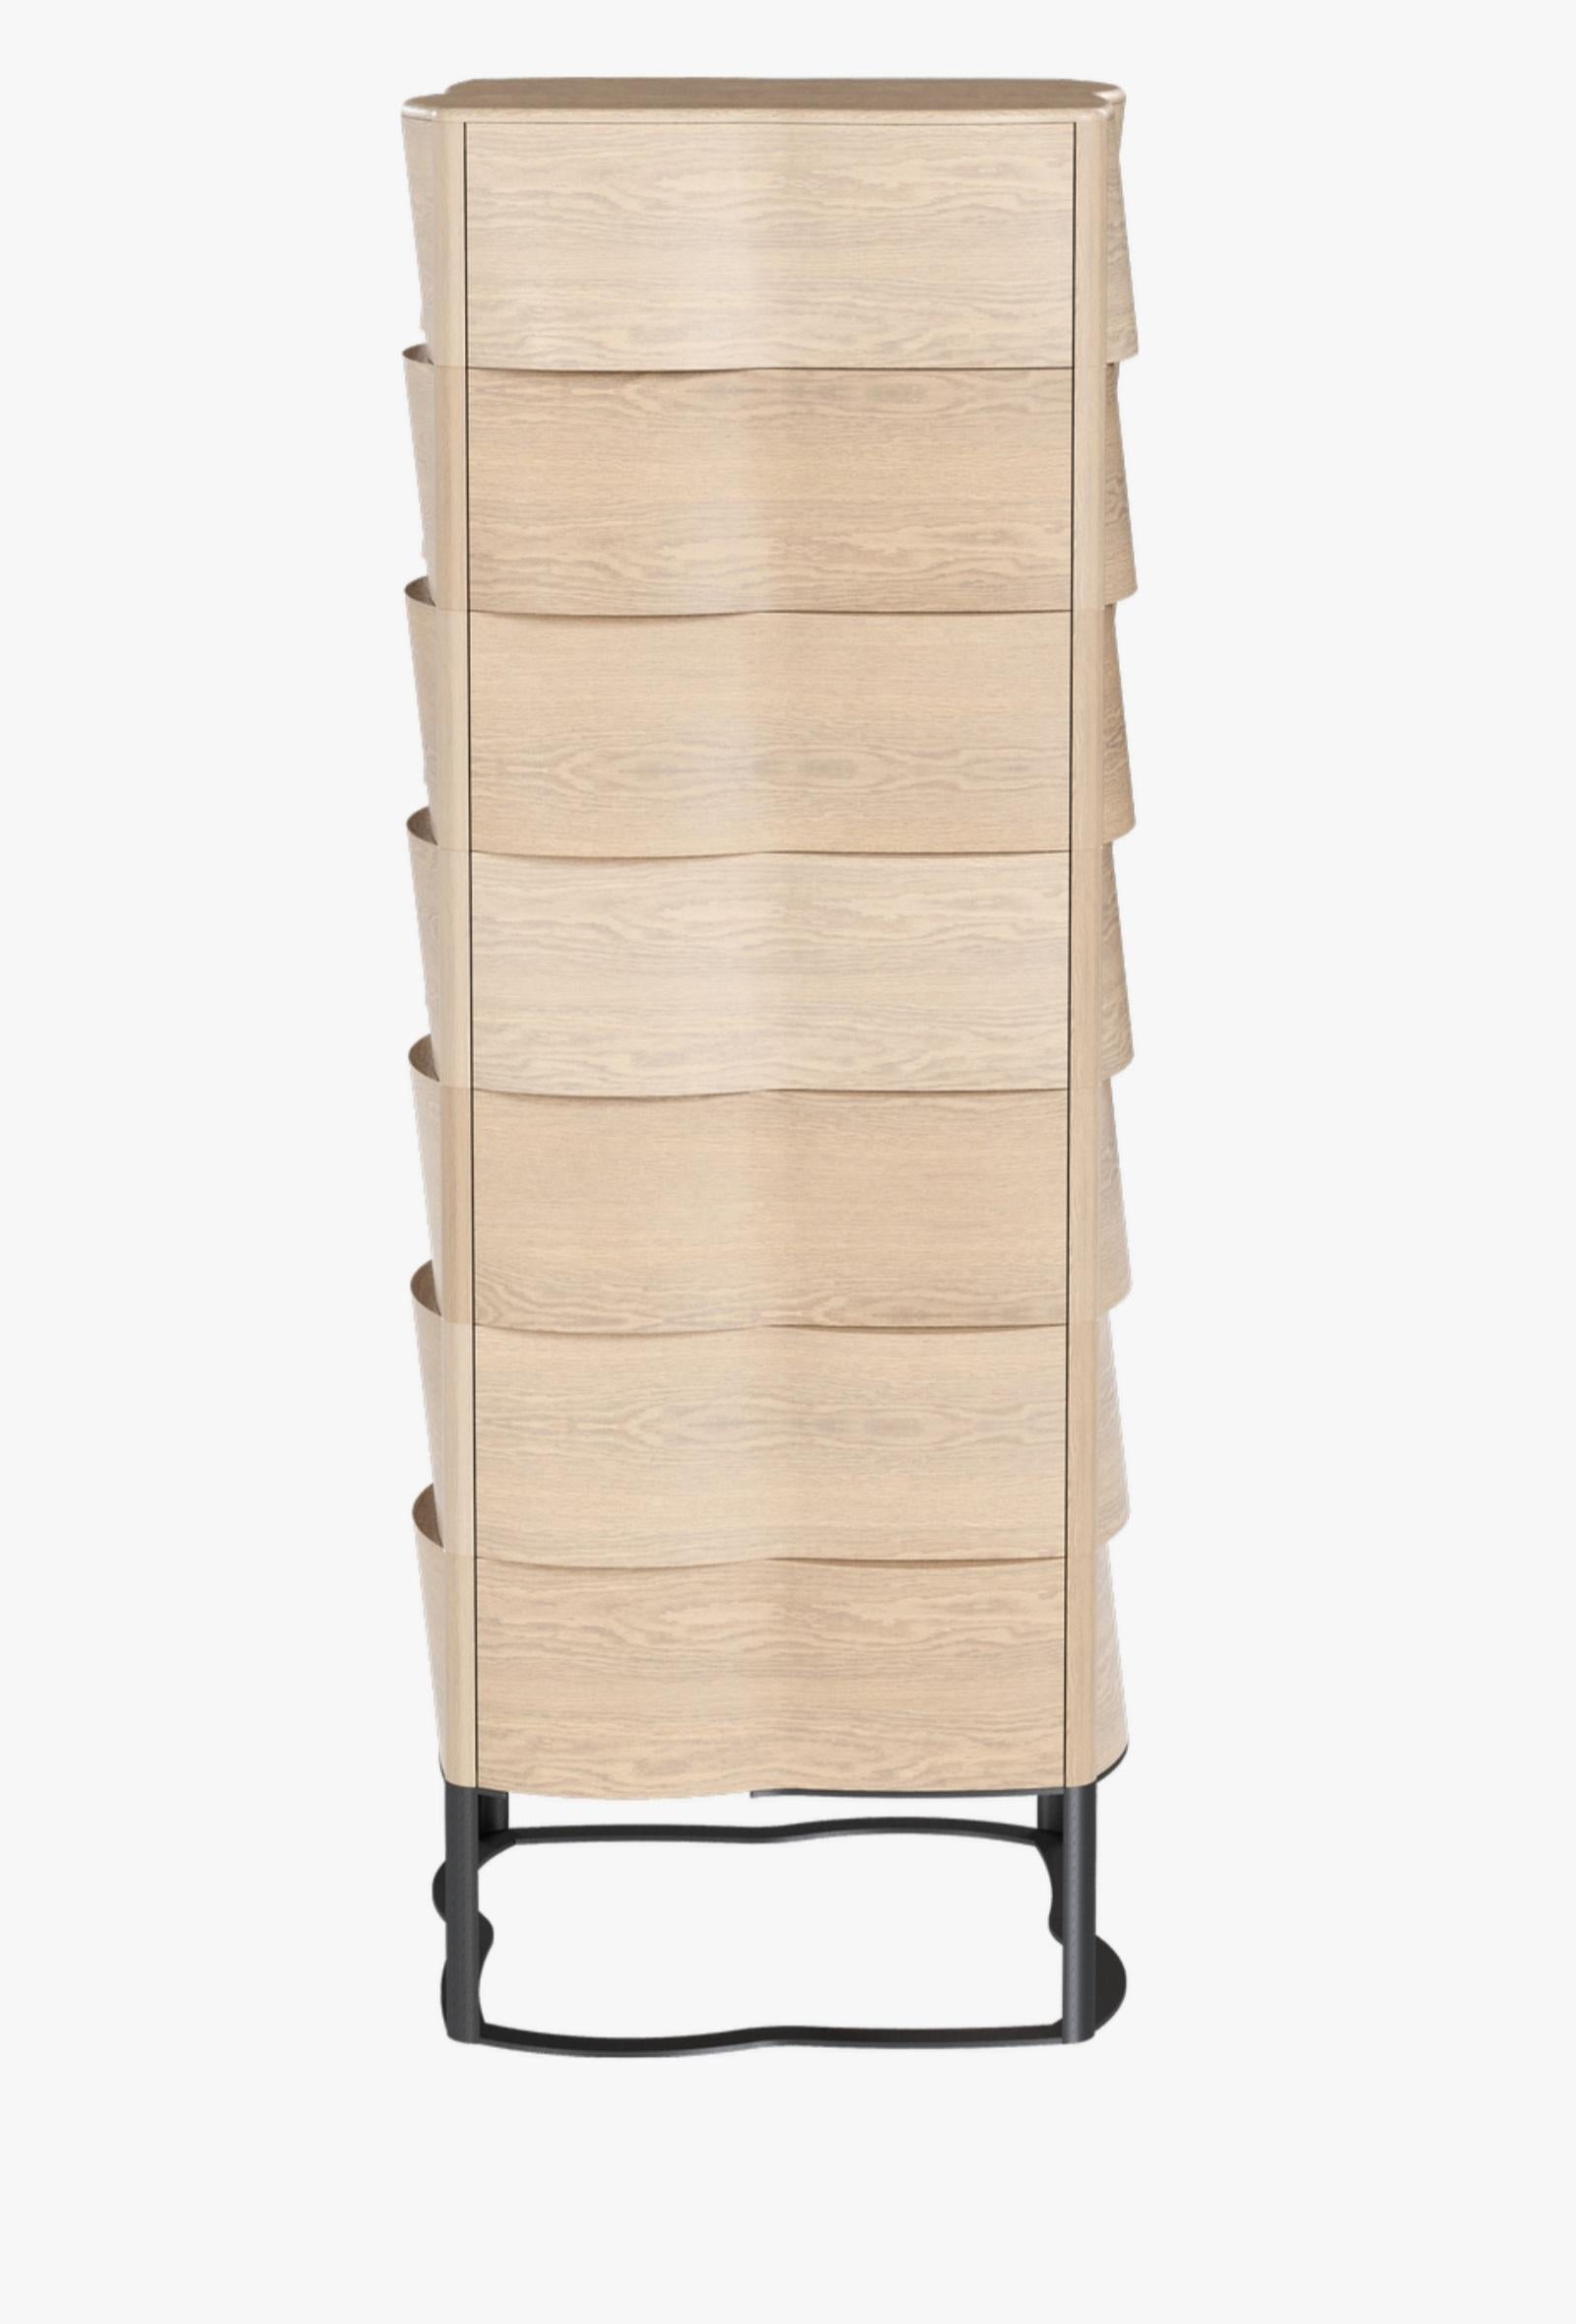 Stunning Sculptural Design creation Oak chest of drawers with a round shaped silhouette that reveals the wood flexibility and beauty and wakens the desire of feeling its shape by touch.
It stands out for the elegance with which the combination of